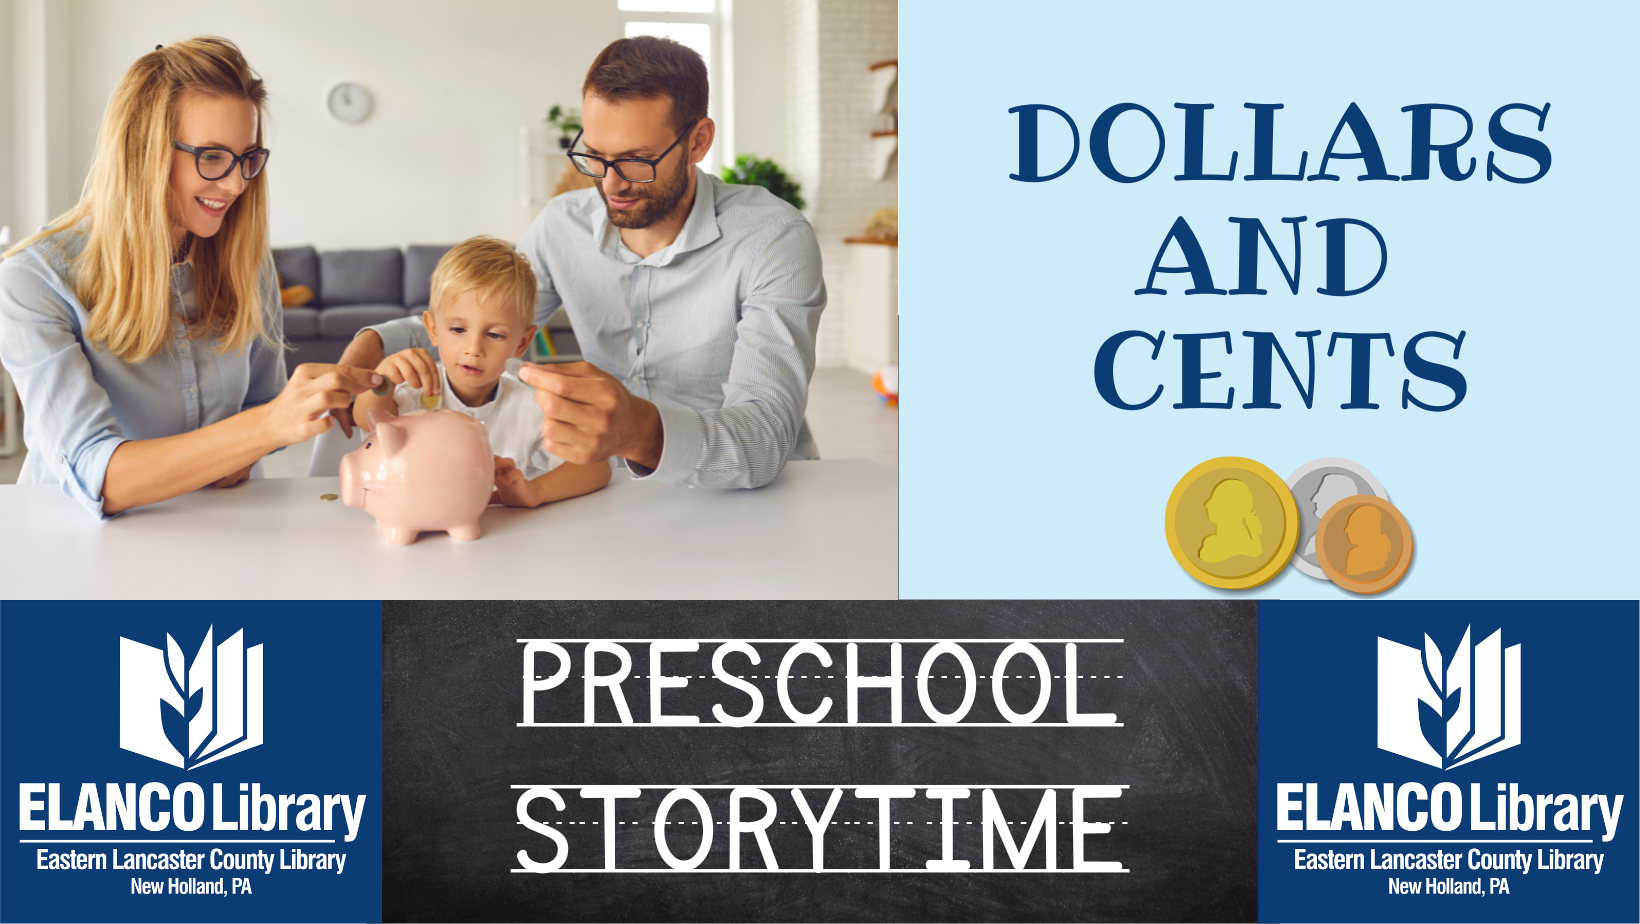 Preschool Storytime - Dollars and Cents